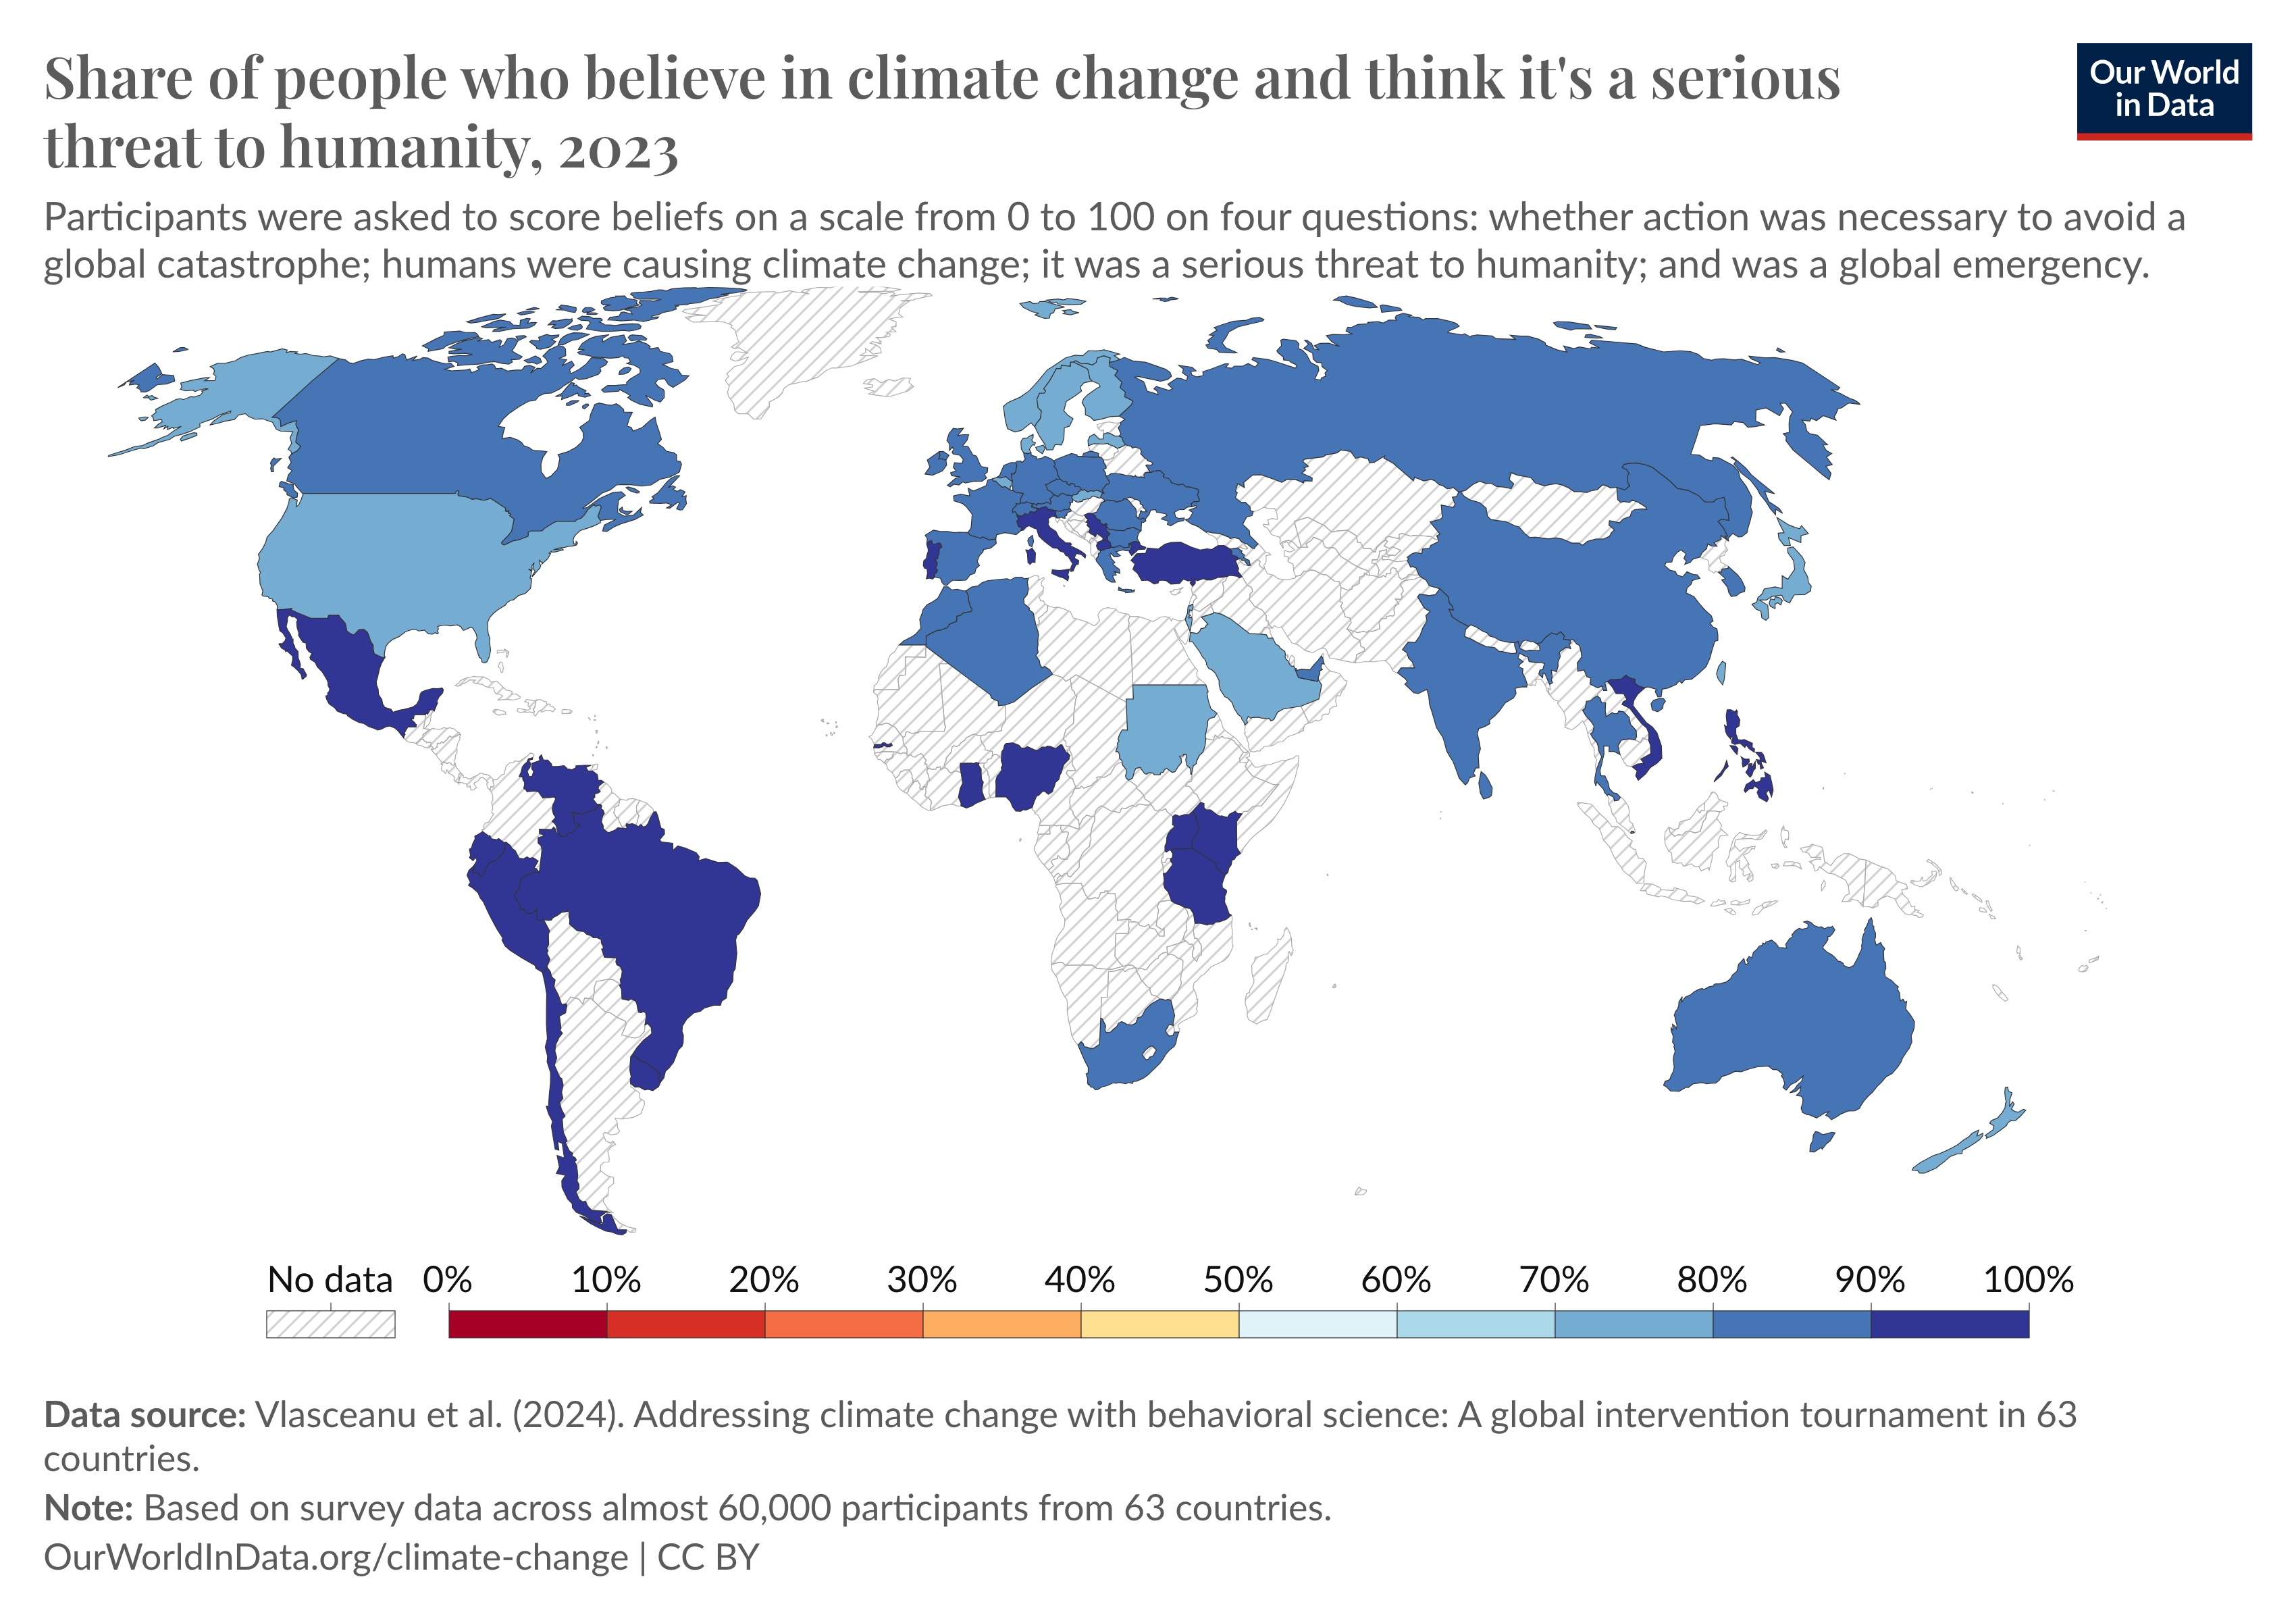 World map showing the percentage of people in various countries who believe climate change is a serious threat to humanity, based on a 2023 survey.